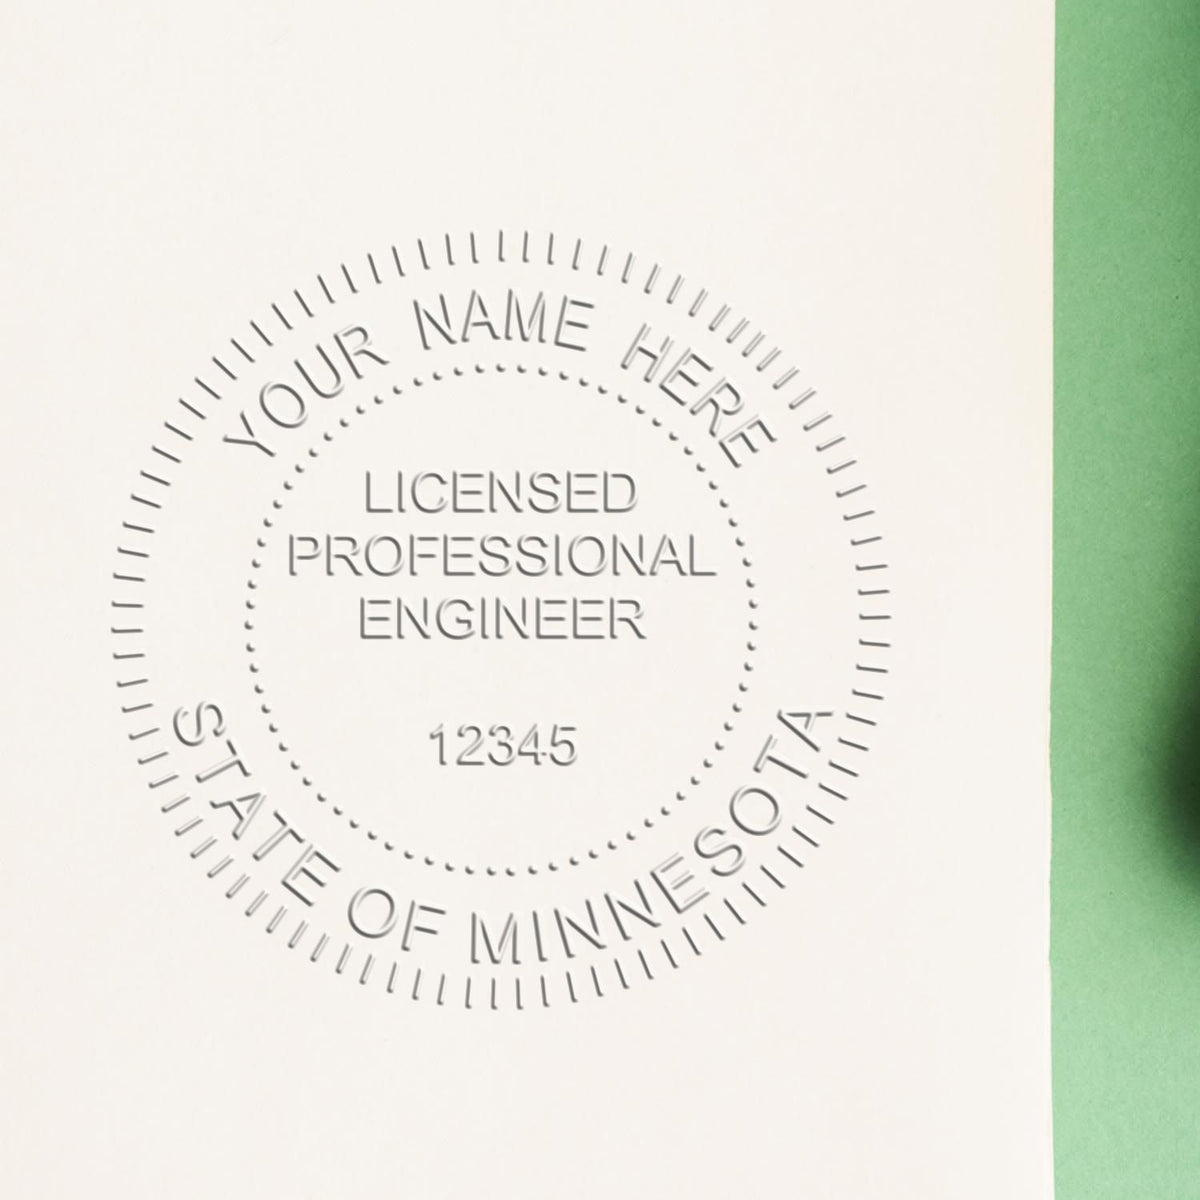 A photograph of the Hybrid Minnesota Engineer Seal stamp impression reveals a vivid, professional image of the on paper.